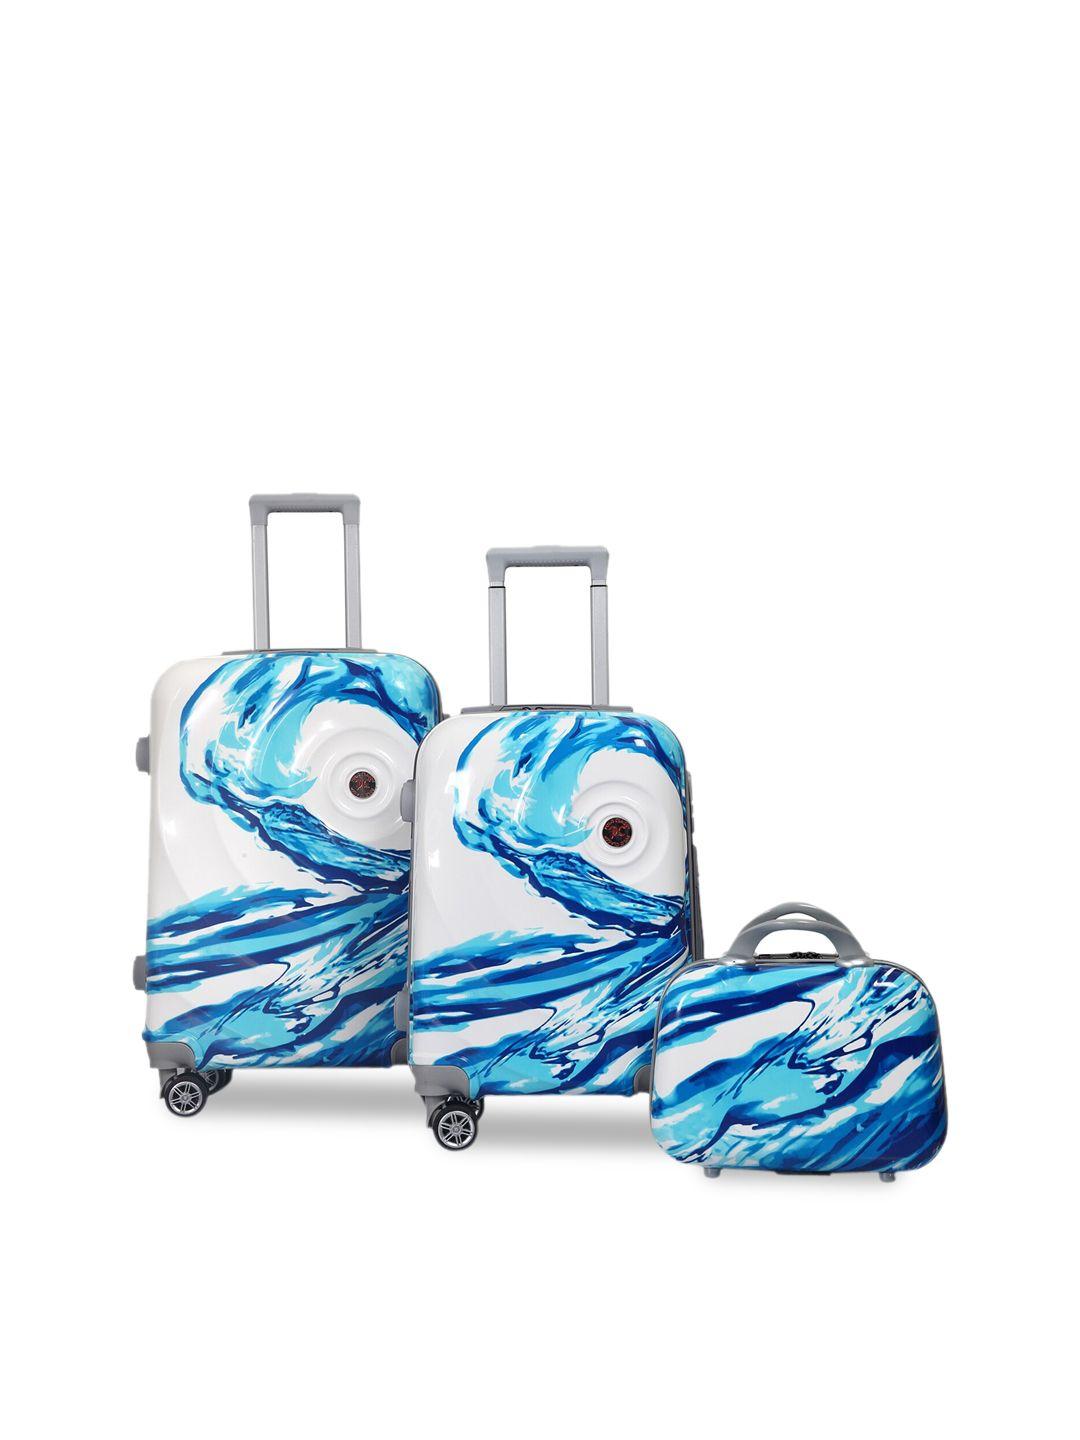 polo class set of 3 blue & white printed trolley bags with vanity bag